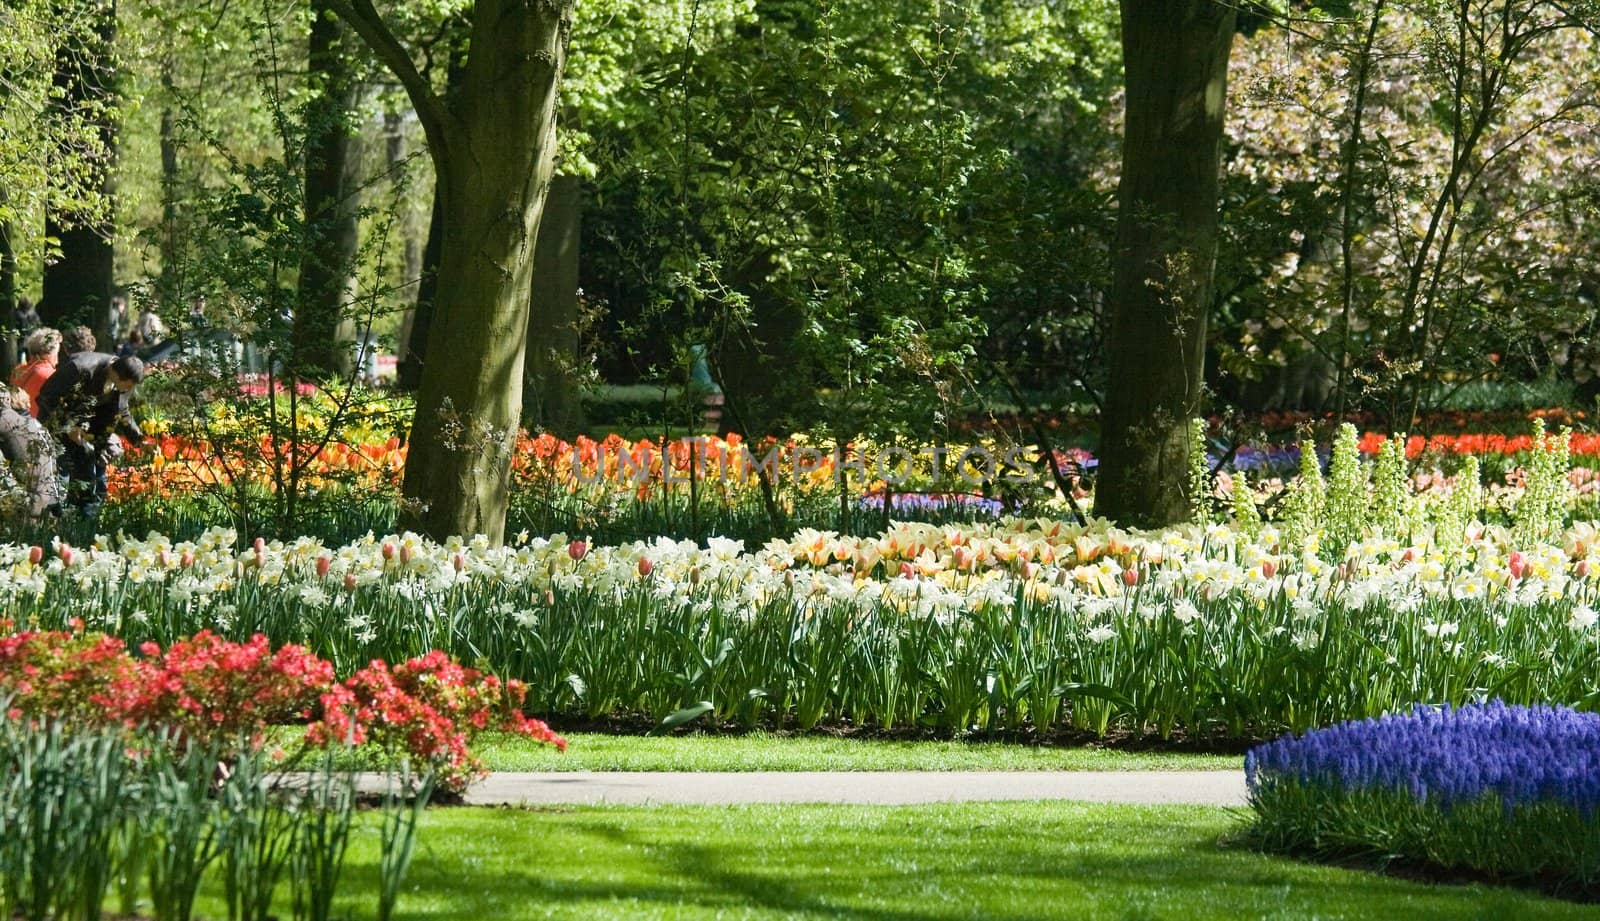 Blooming daffodils and tulips in the park in spring